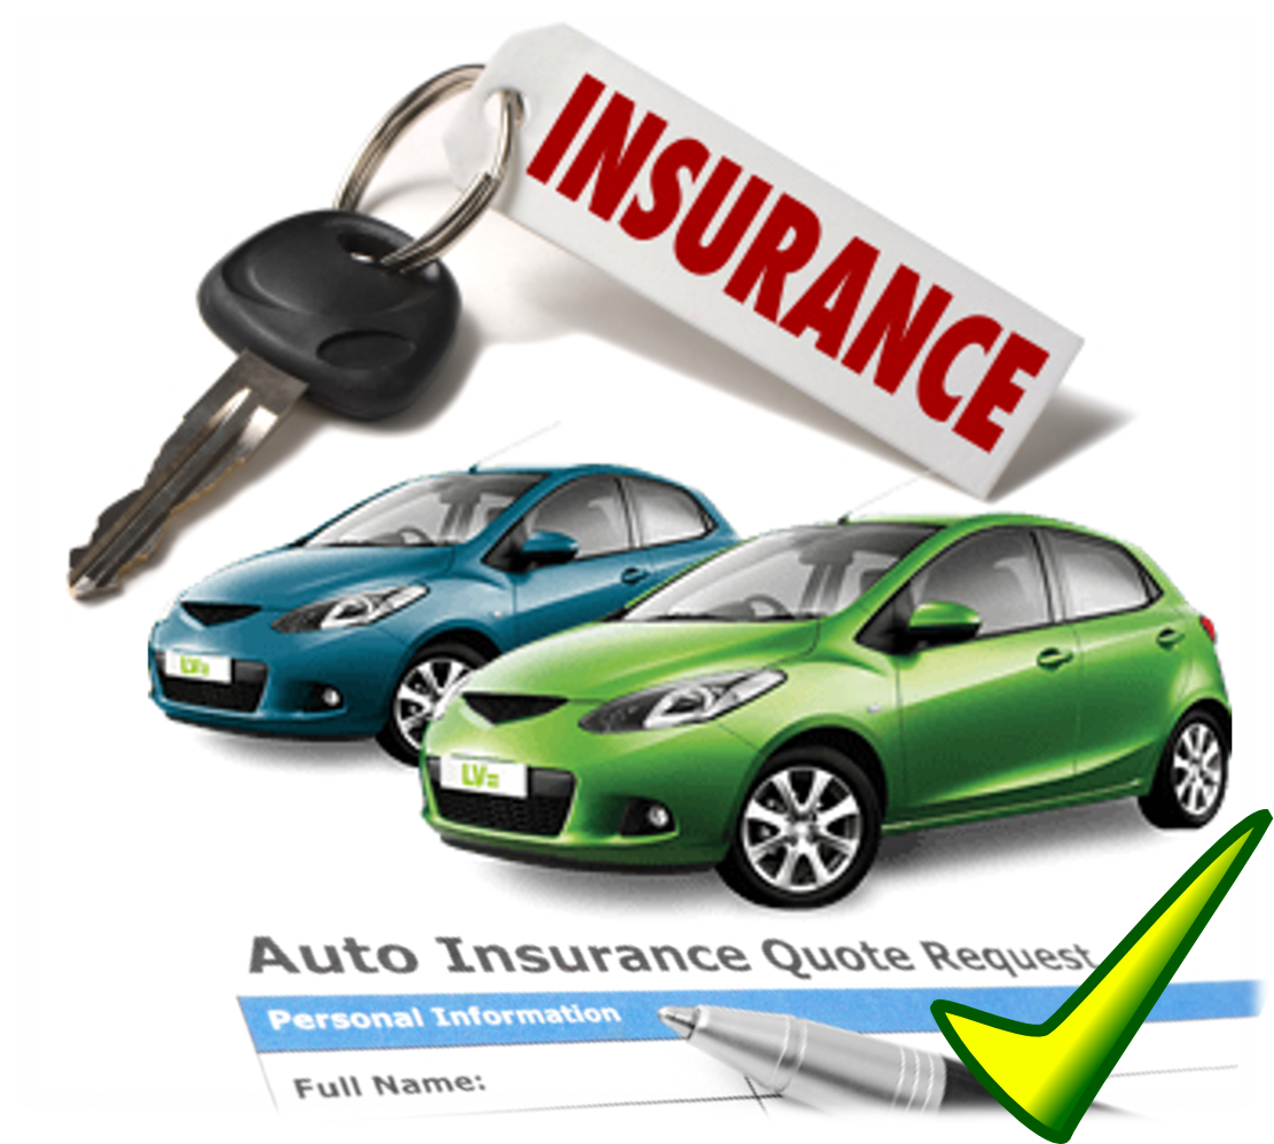 Insurance Quotes Online: Acquire free car insurance rate through online.